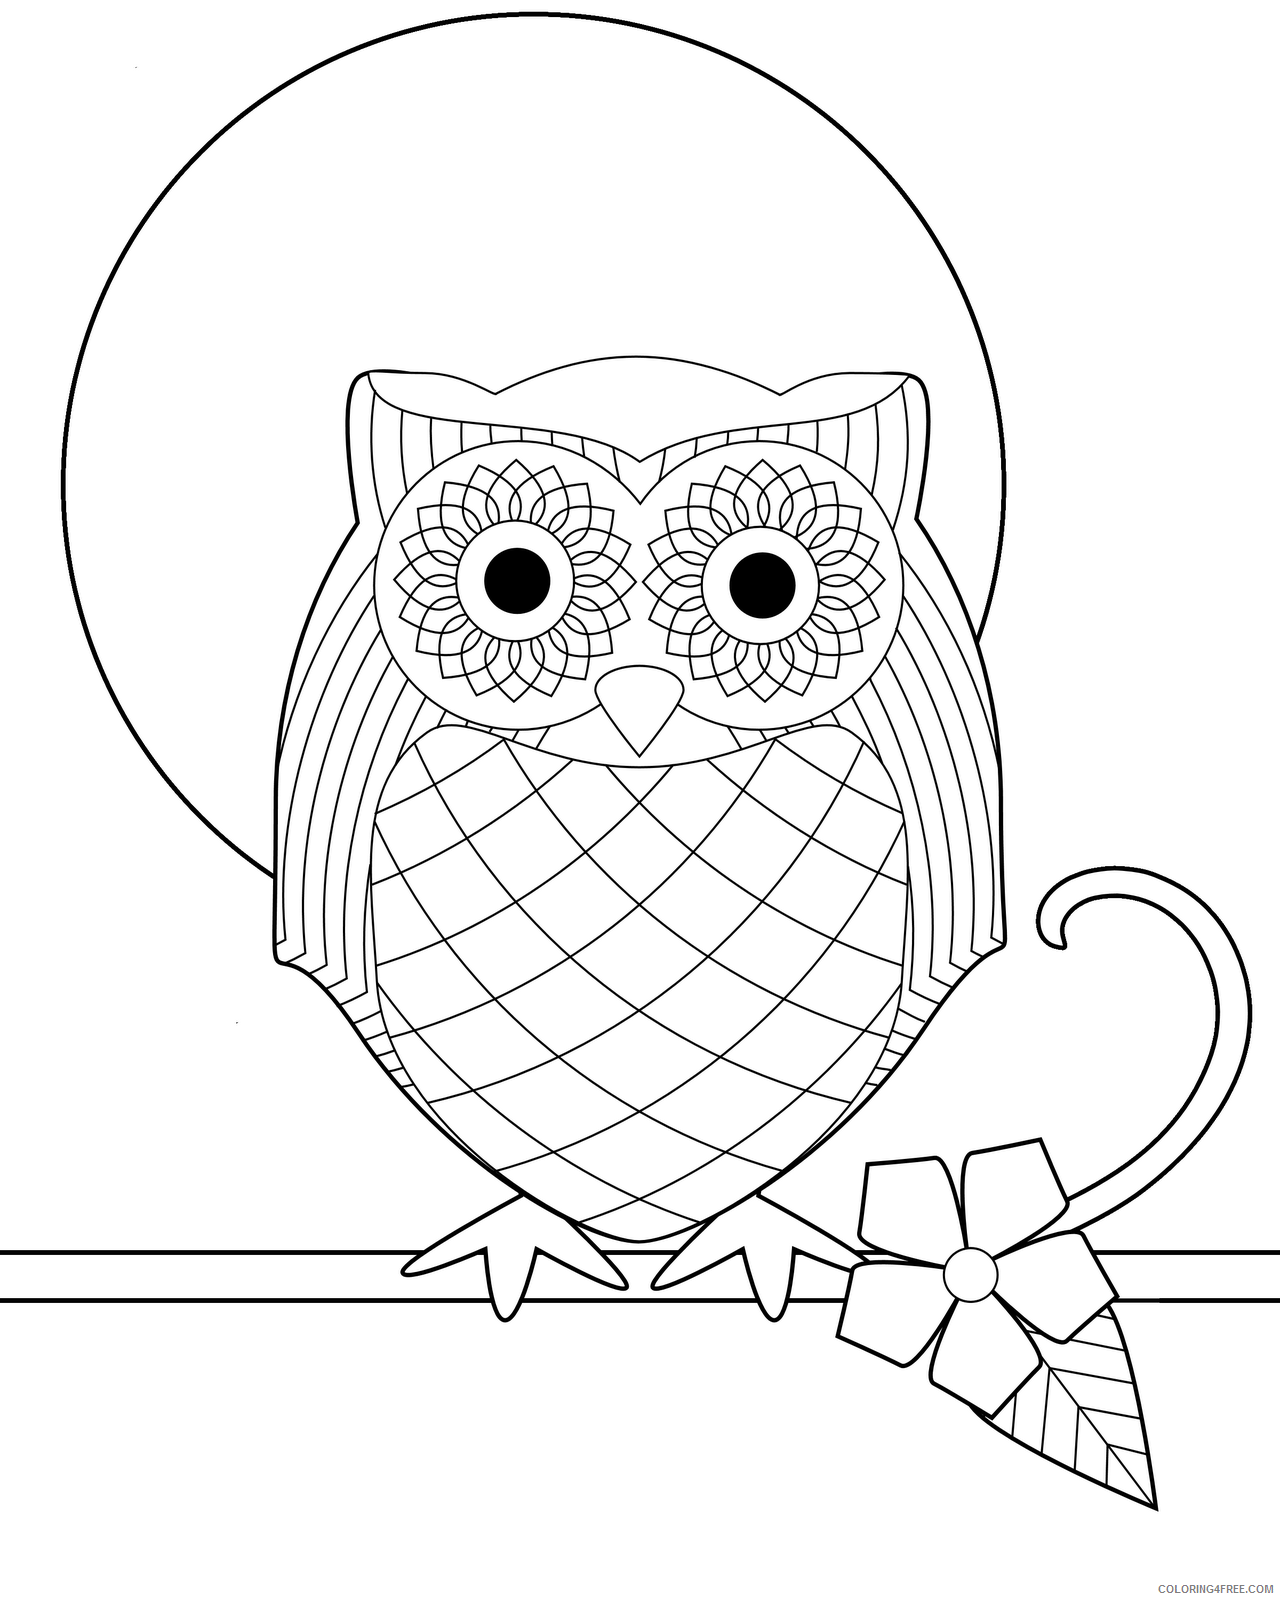 Owl Coloring Pages Animal Printable Sheets Baby Owl 2021 3603 Coloring4free.com  